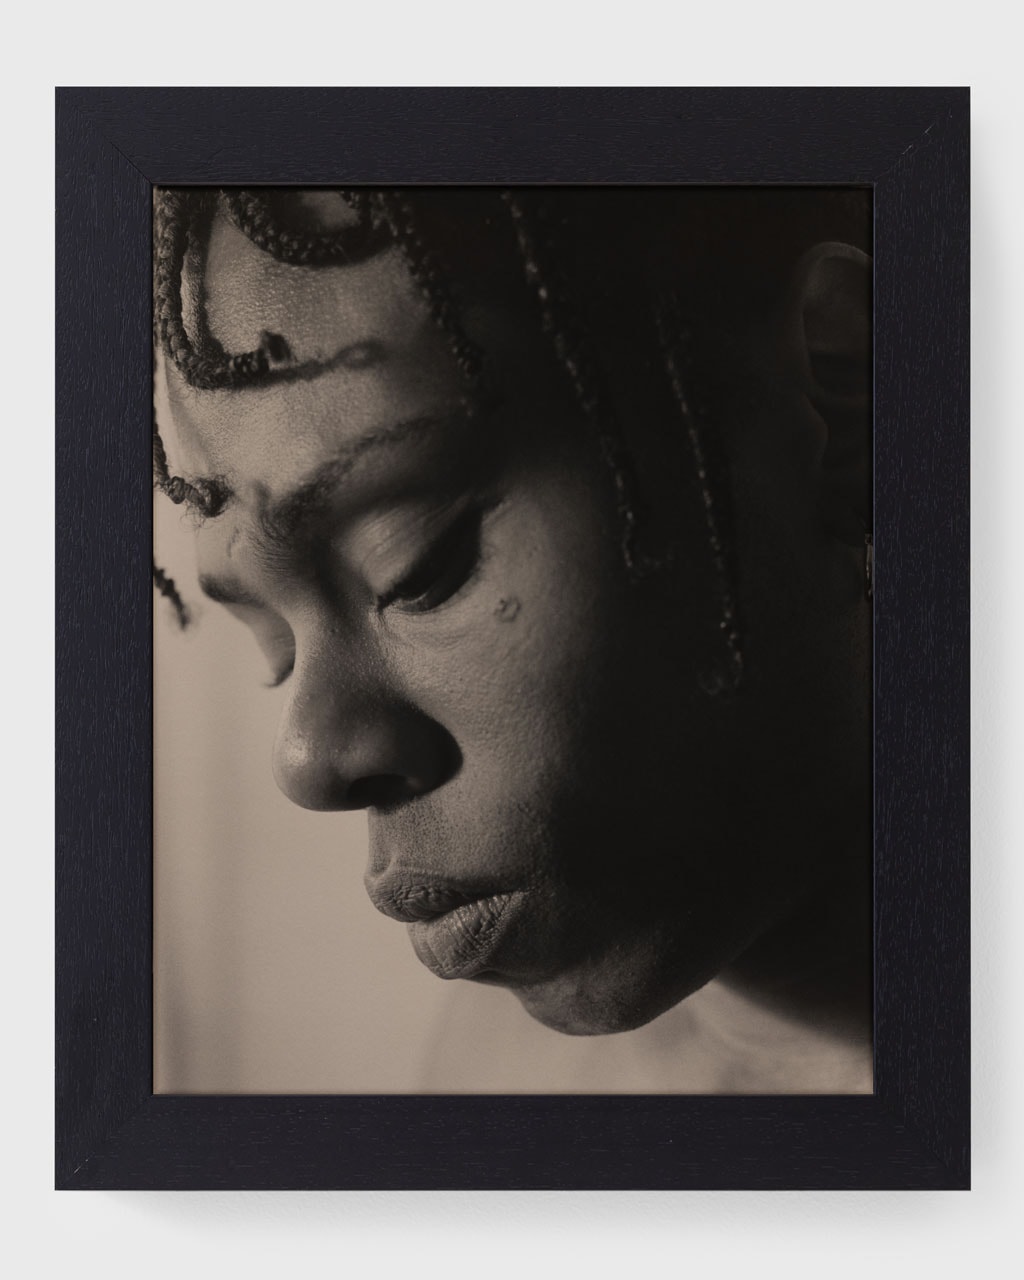 Photographer Quil Lemons Opens First Solo Exhibition at the Hannah Traore Gallery